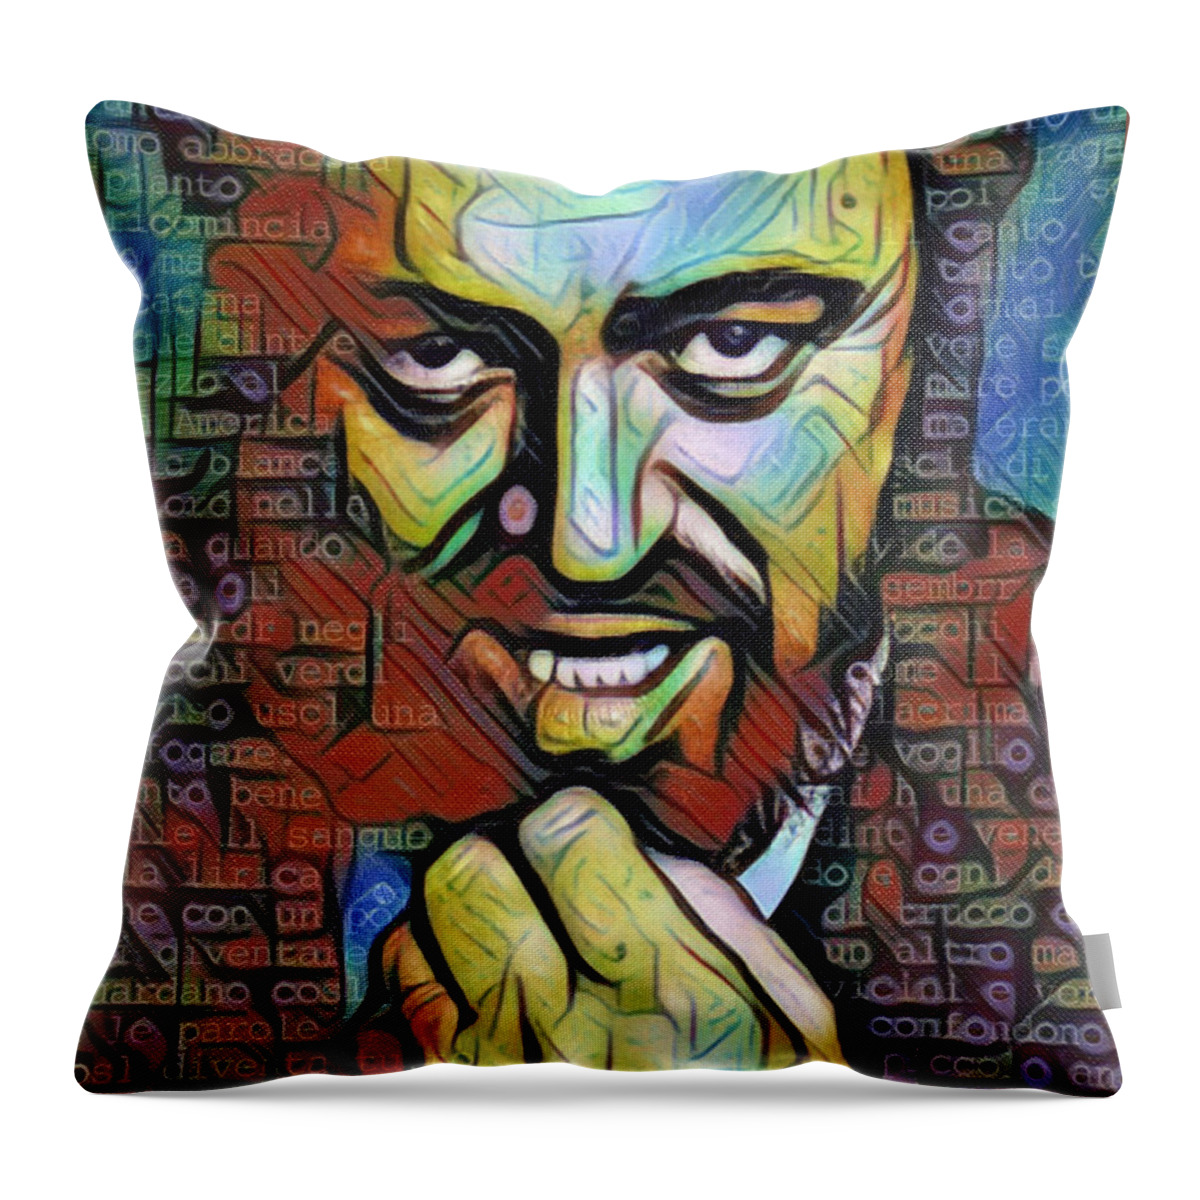 Luciano Pavarotti Throw Pillow featuring the painting Luciano Pavarotti Painting 2 by Tony Rubino